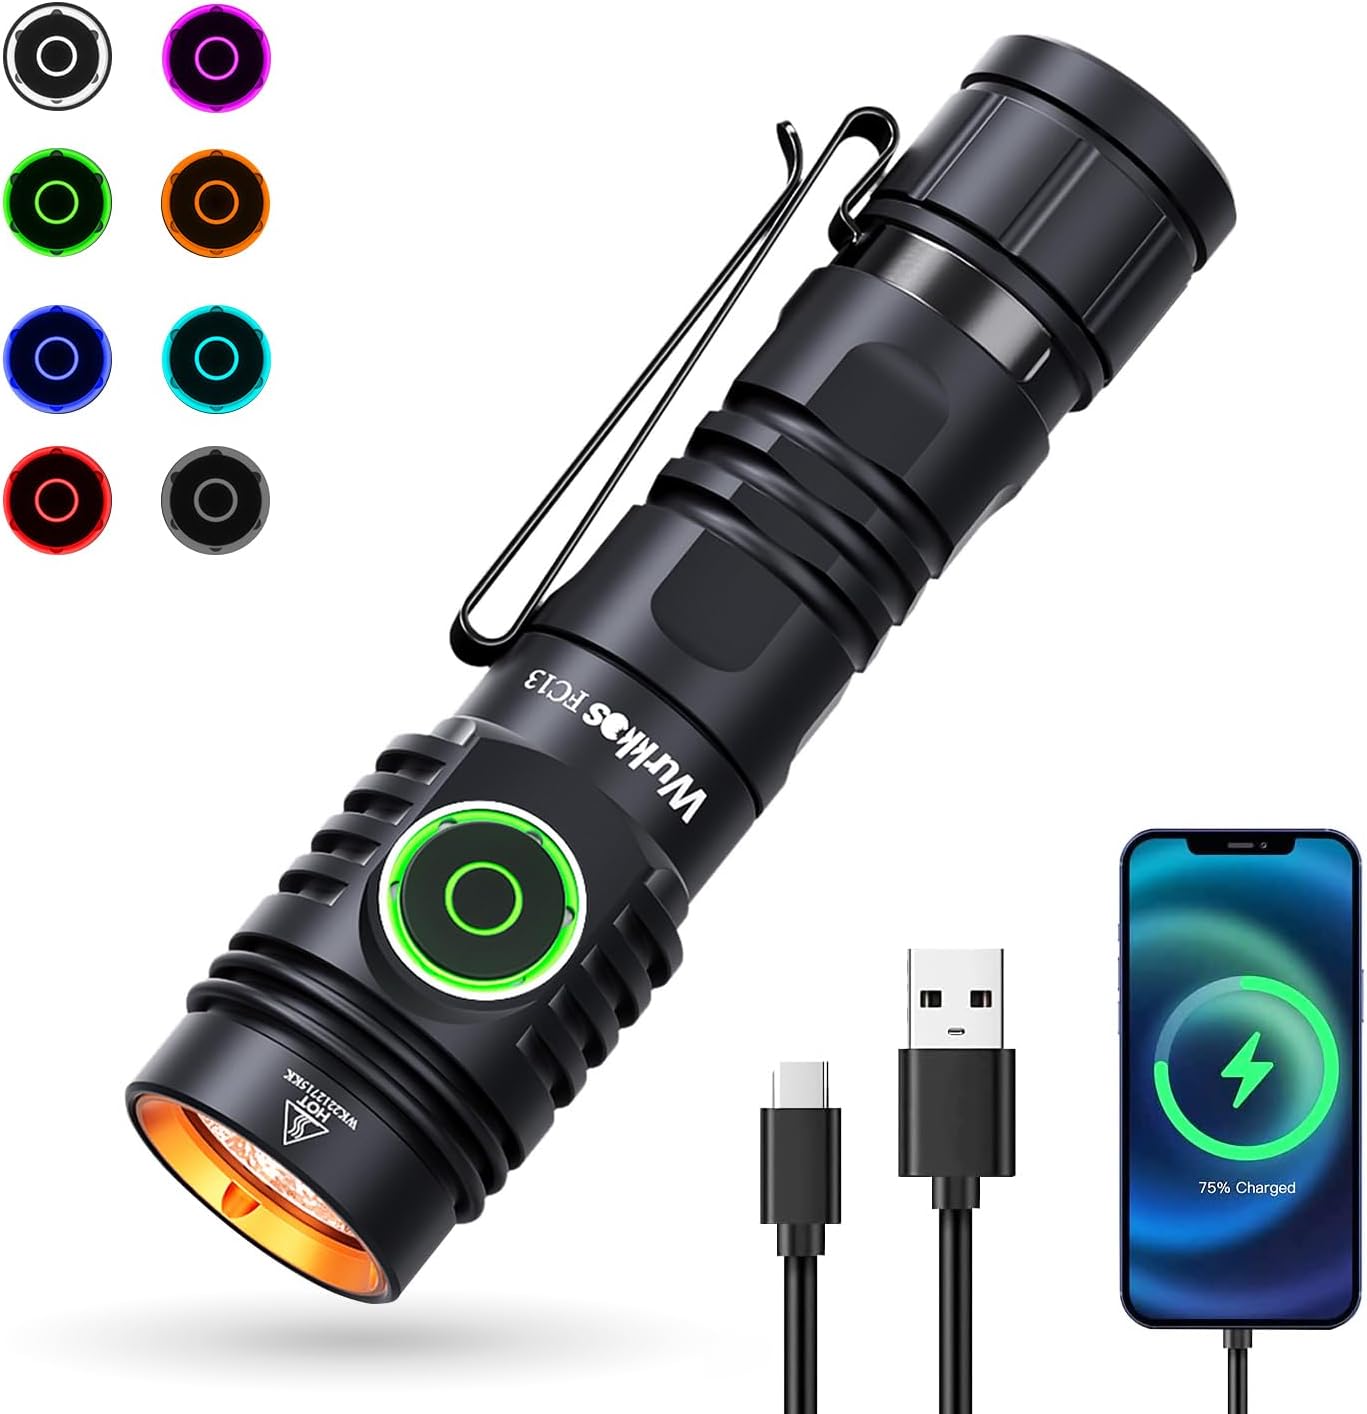 Wurkkos FC13 3500lm Flashlight, RGB AUX Button Light Free Shipping Including battery $22.49 with coupon